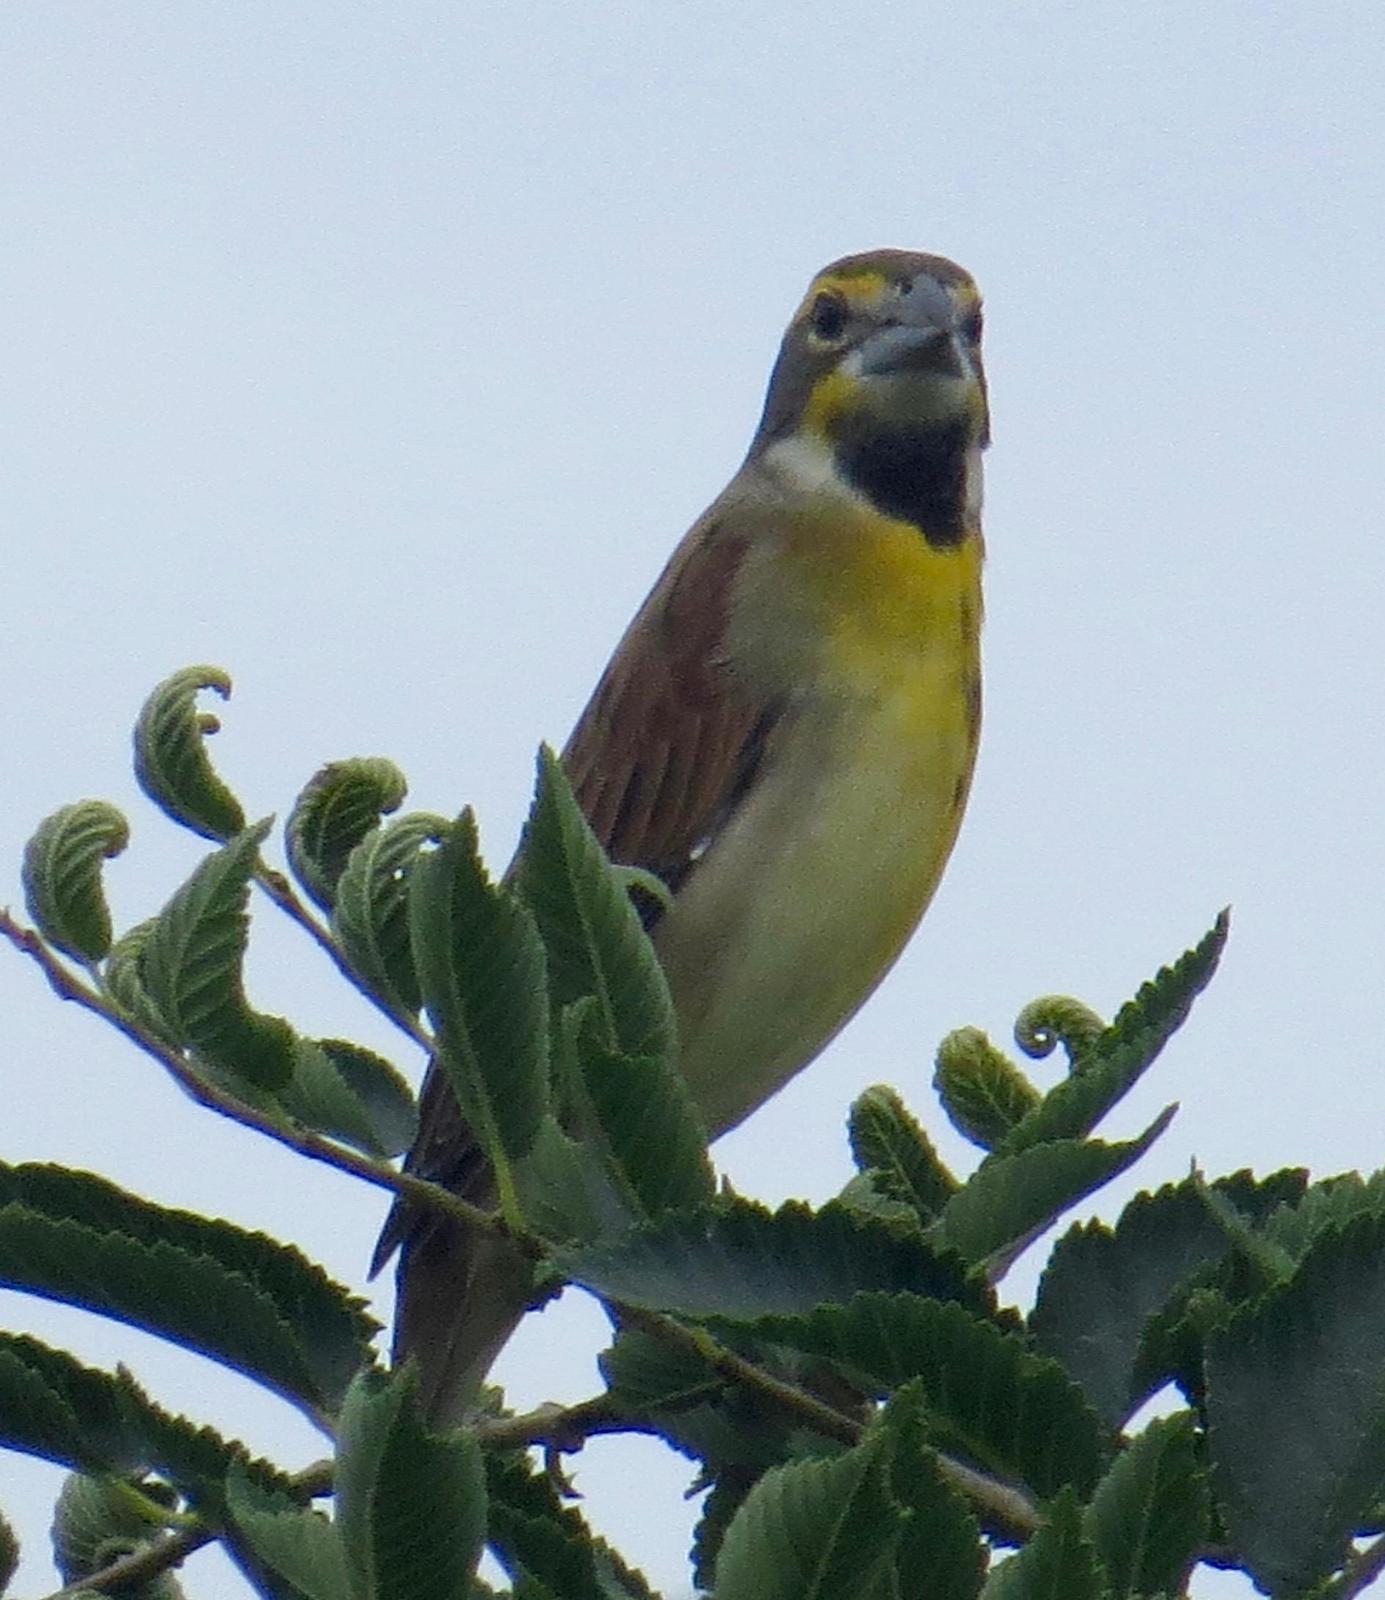 Dickcissel Photo by Don Glasco